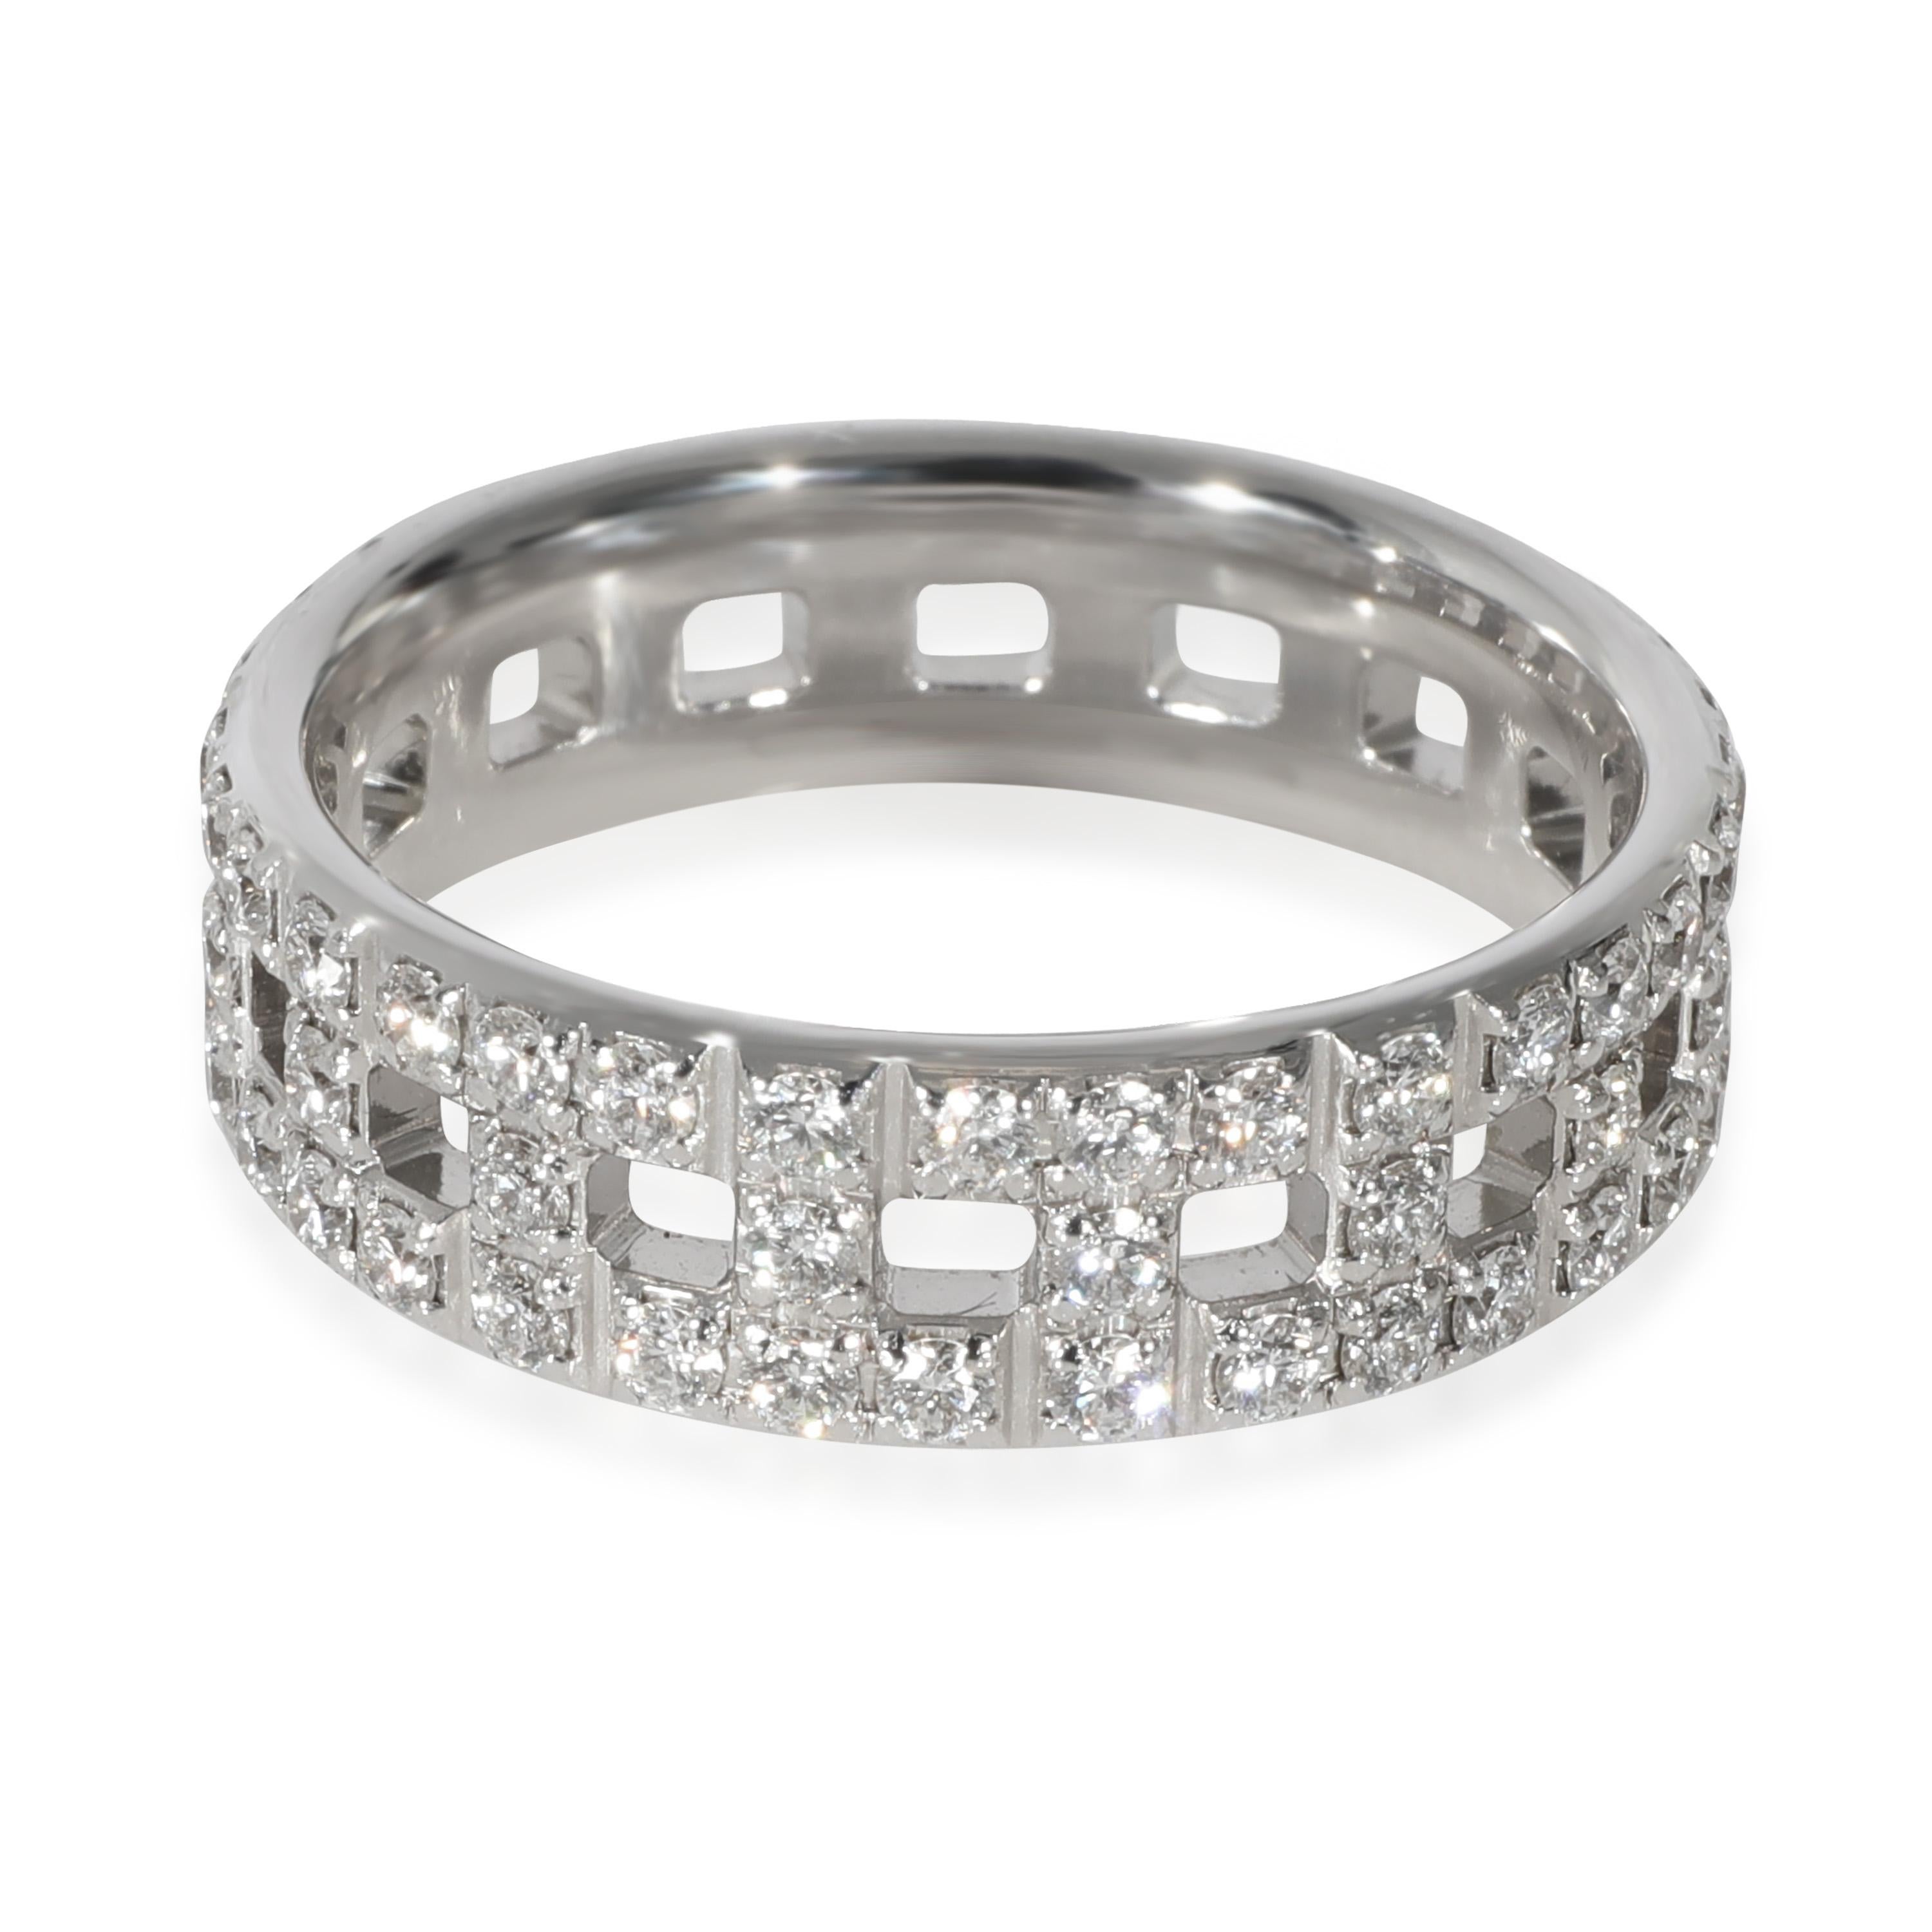 Tiffany & Co. Tiffany True Diamond Ring in 18k White Gold 0.99 CTW

PRIMARY DETAILS
SKU: 129450
Listing Title: Tiffany & Co. Tiffany True Diamond Ring in 18k White Gold 0.99 CTW
Condition Description: Inspired by the 'T' motif that Tiffany has been